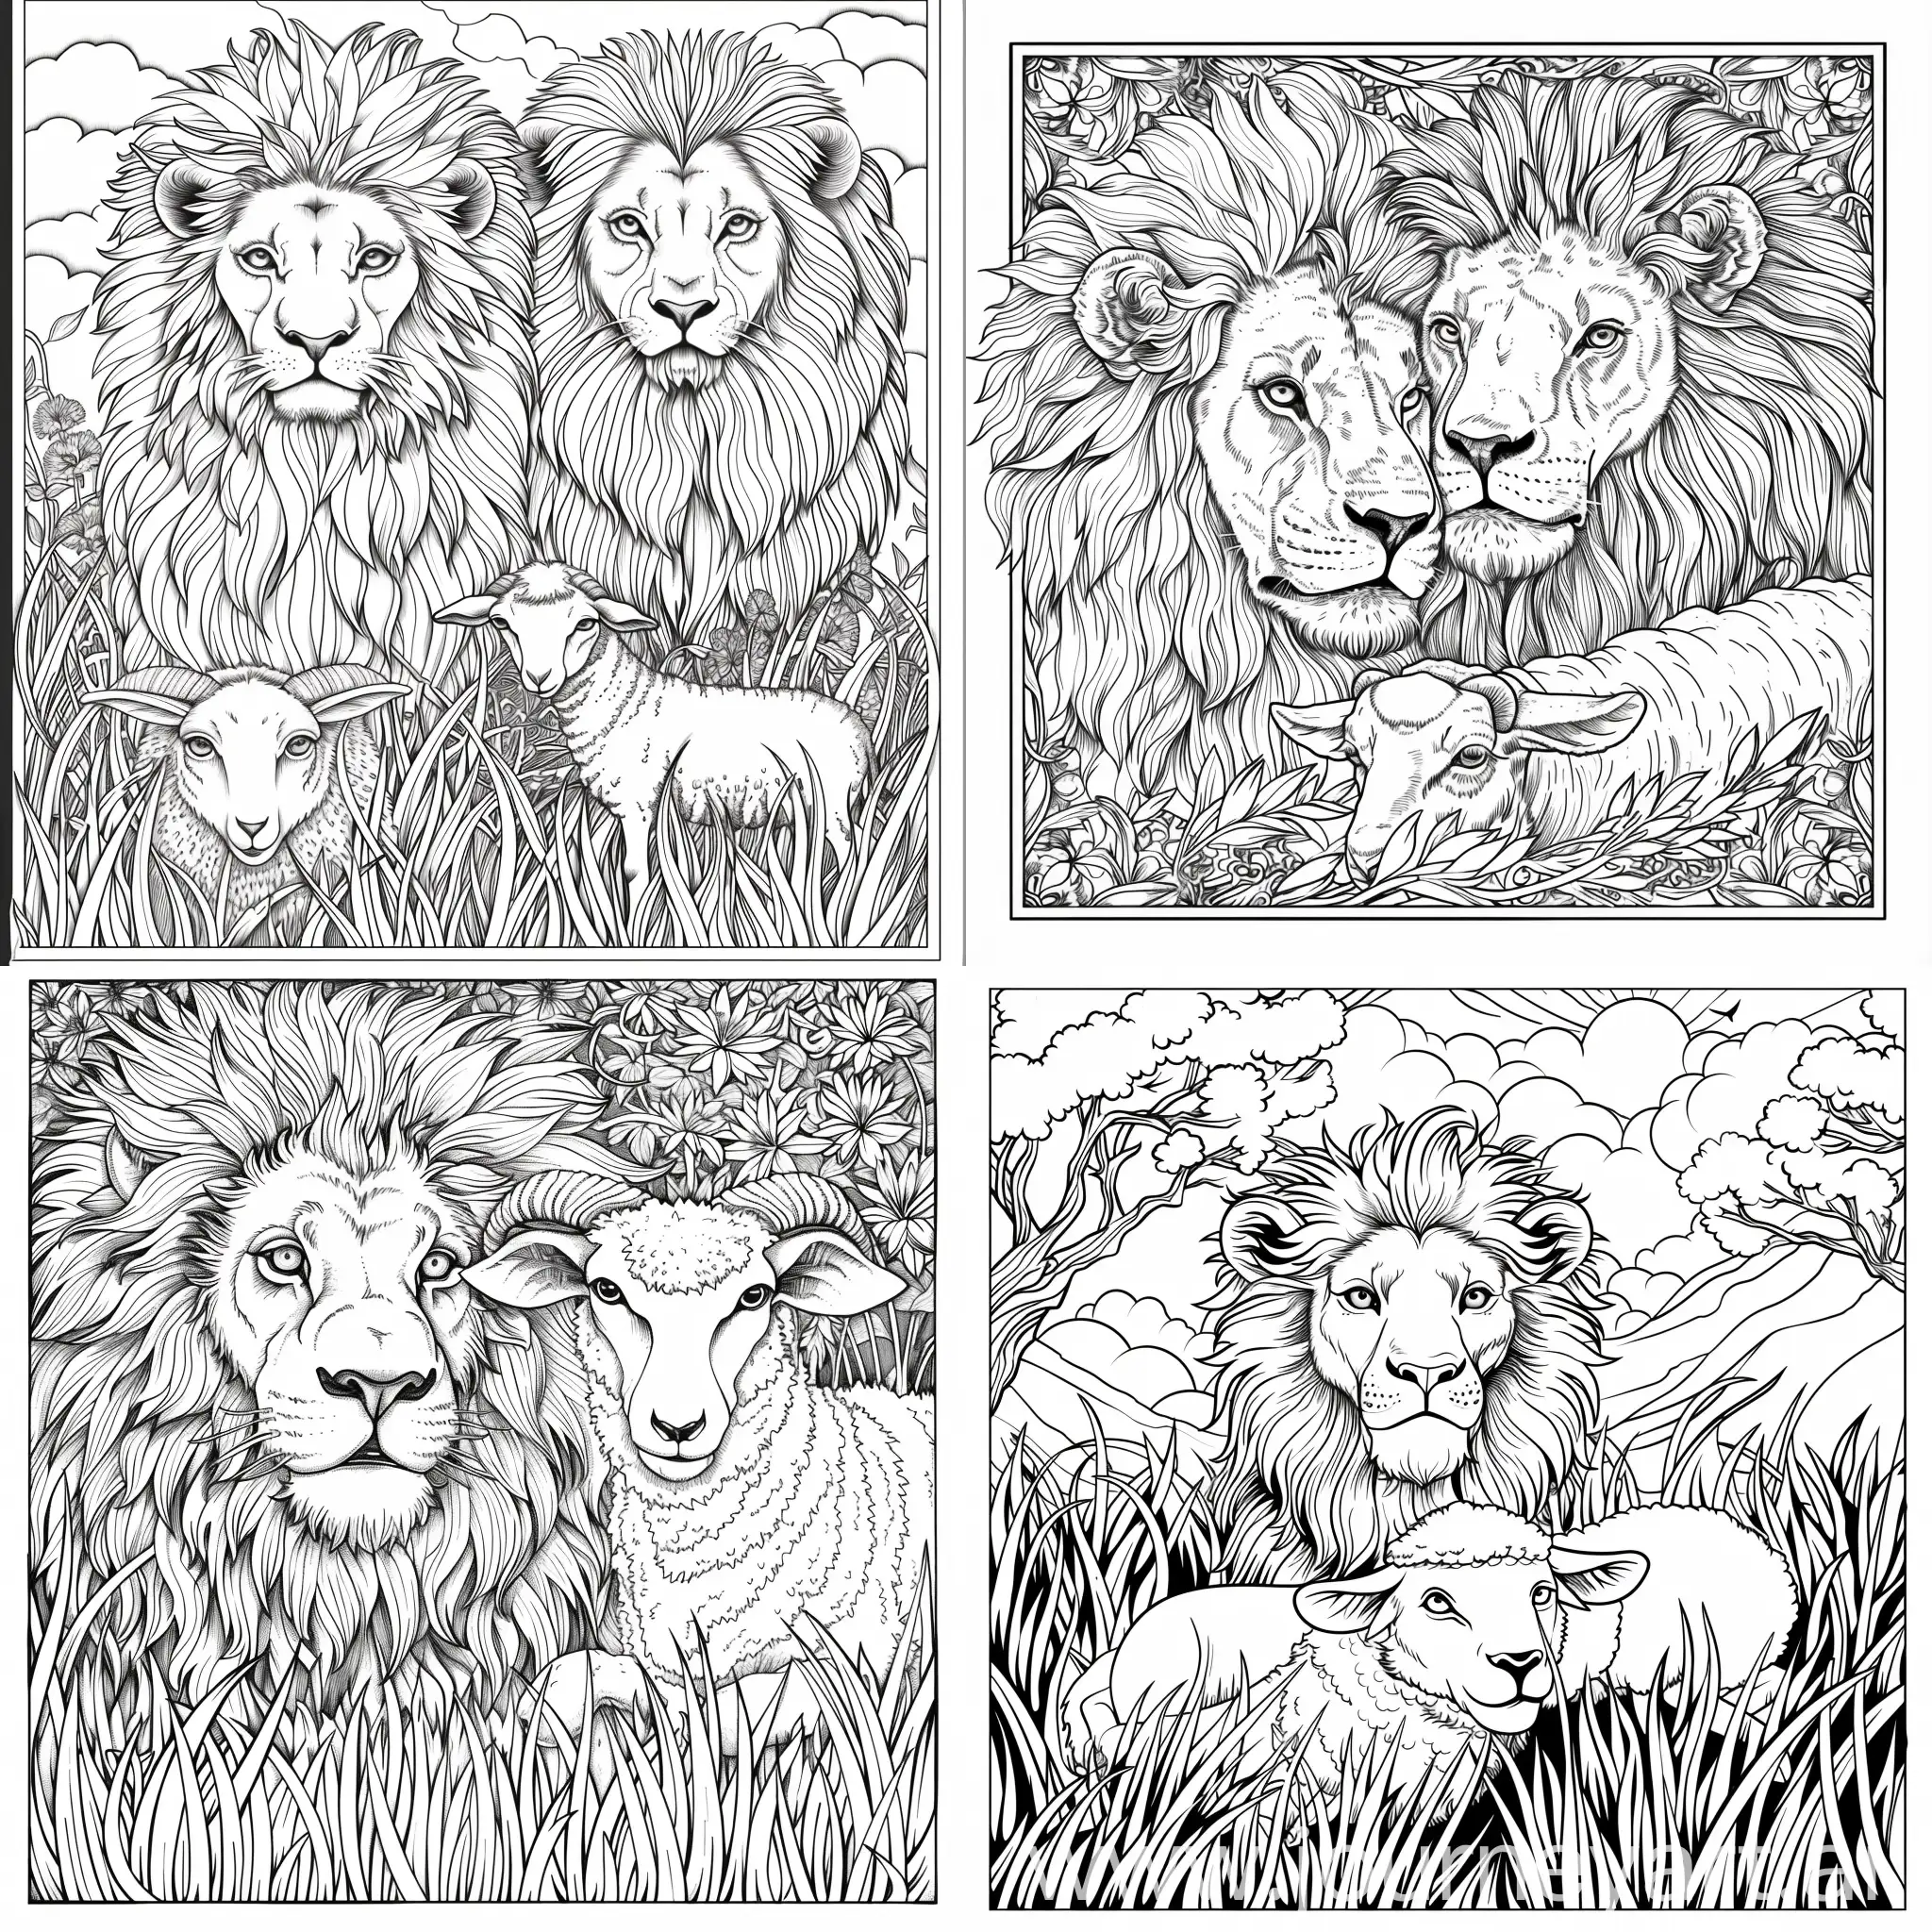 Lion-and-Lamb-Coloring-Page-Peaceful-Wildlife-Illustration